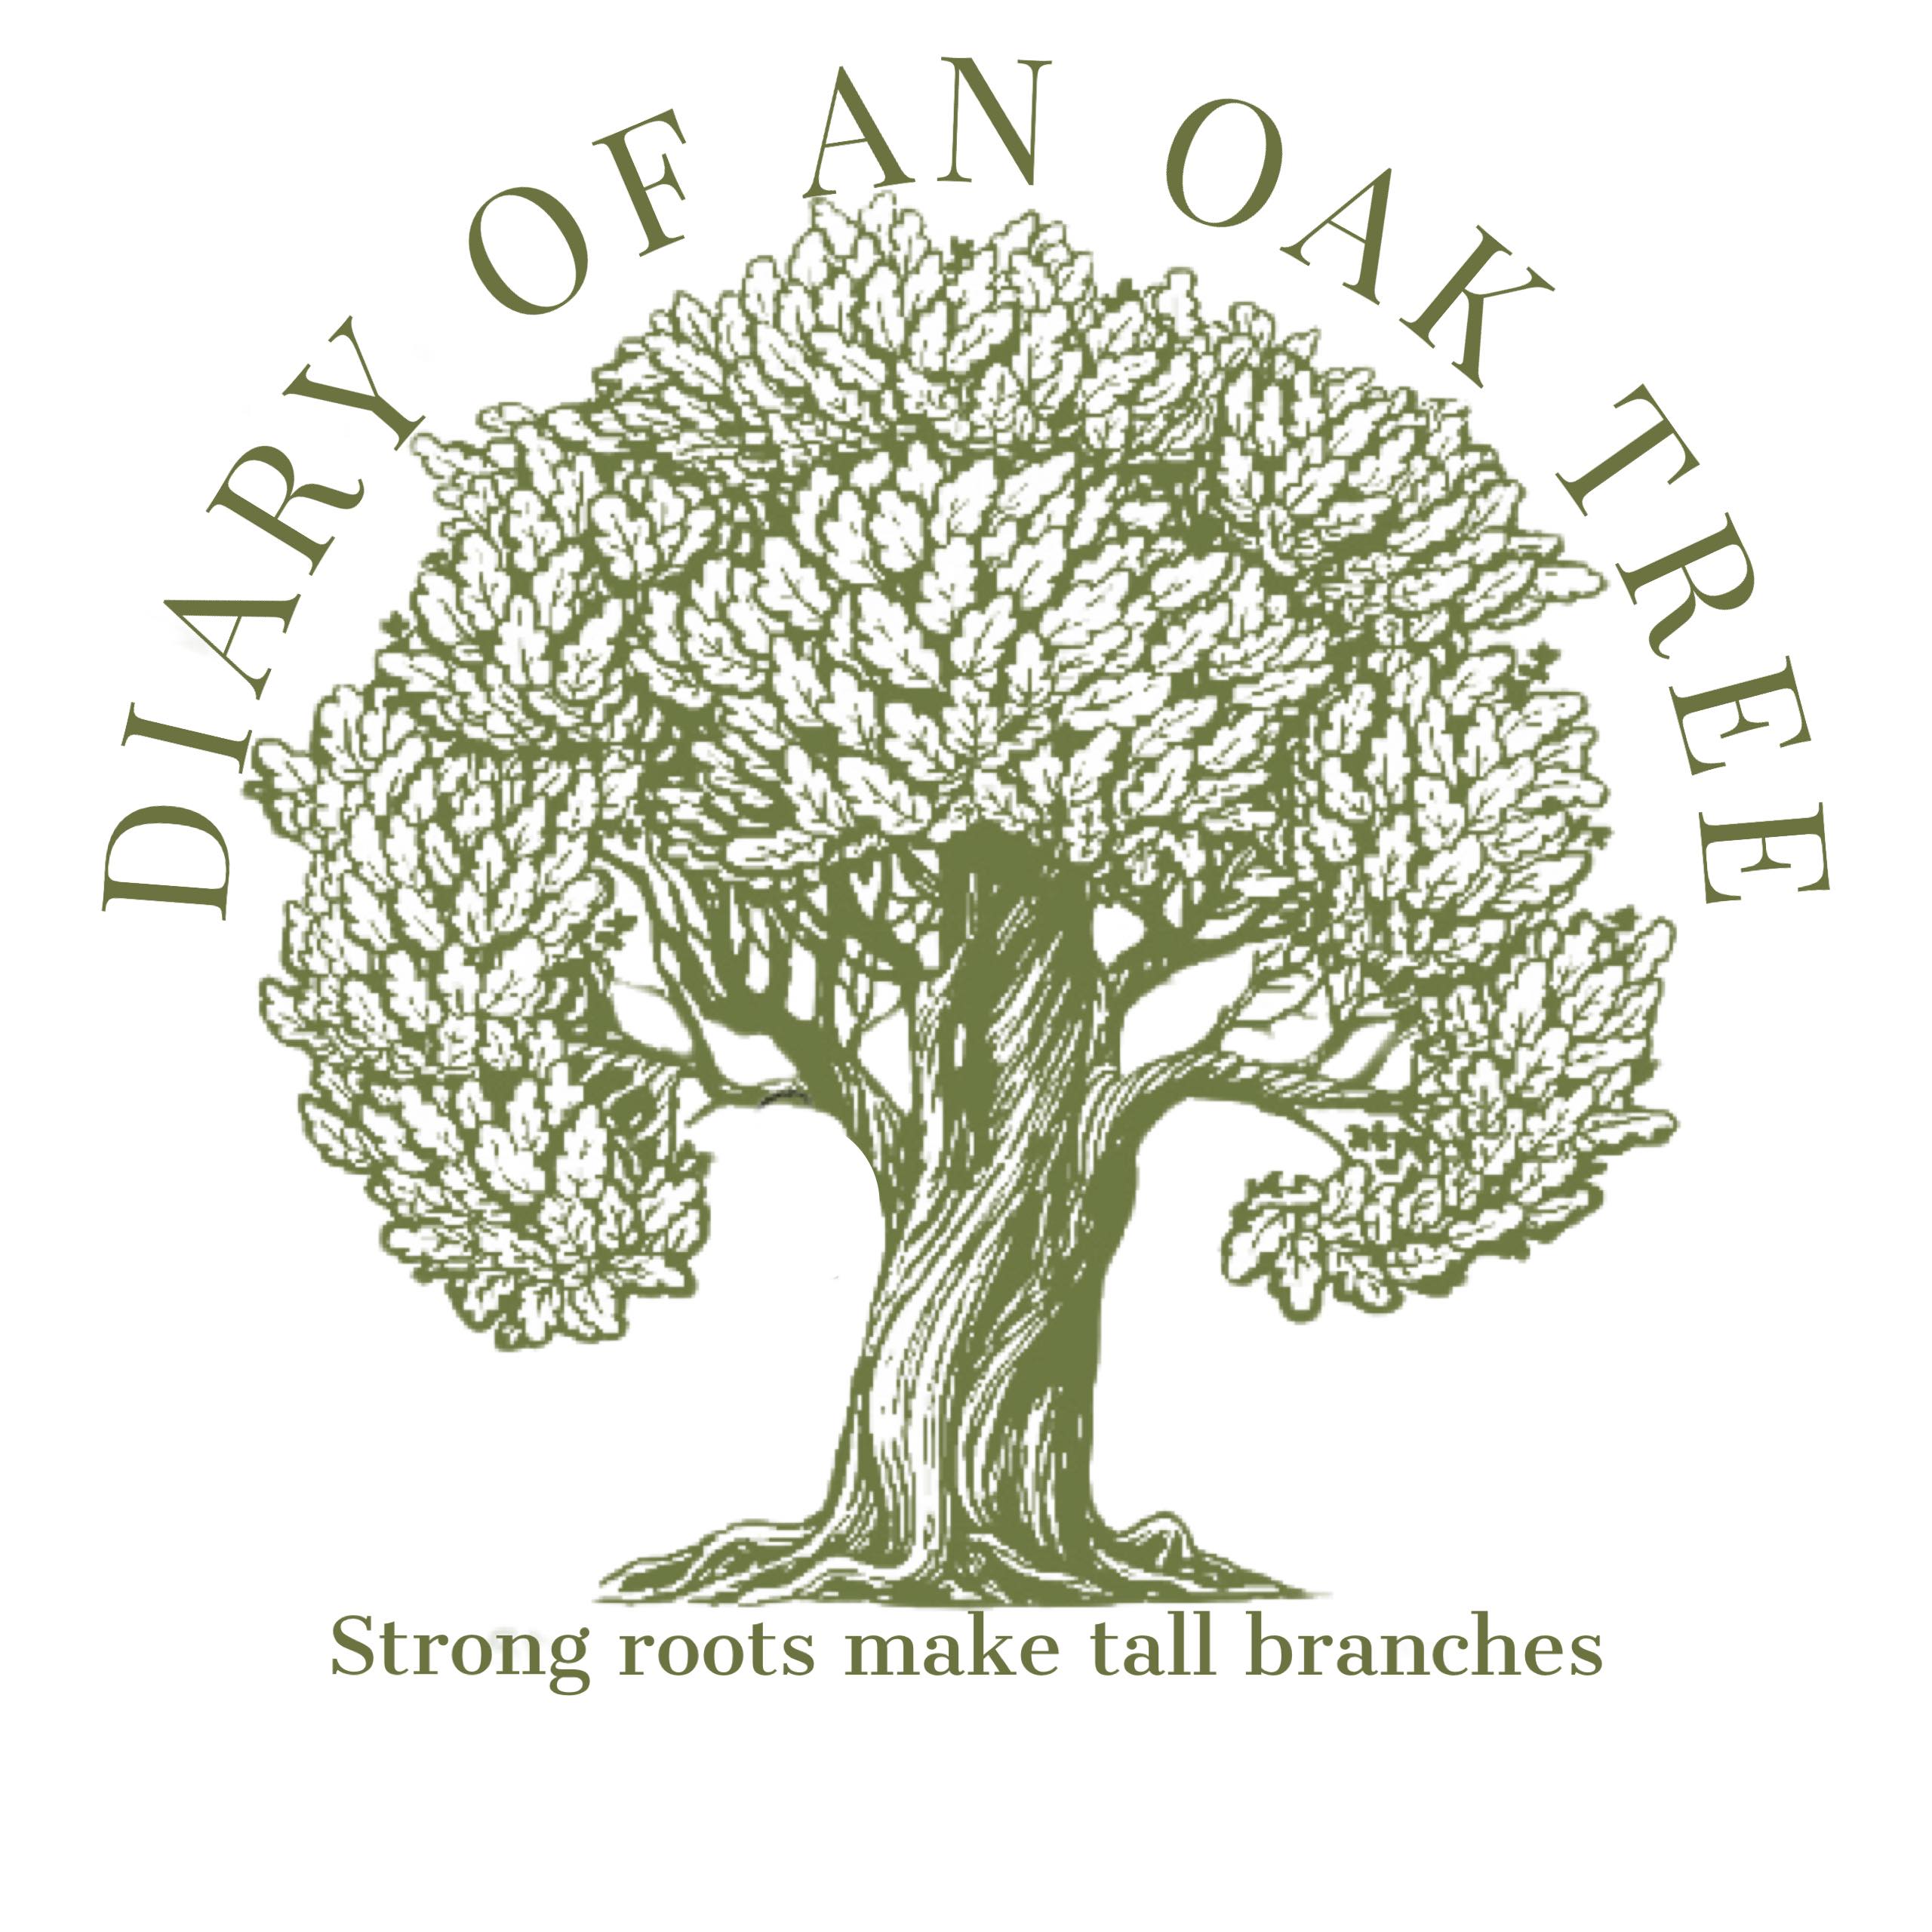 Diary of an Oaktree